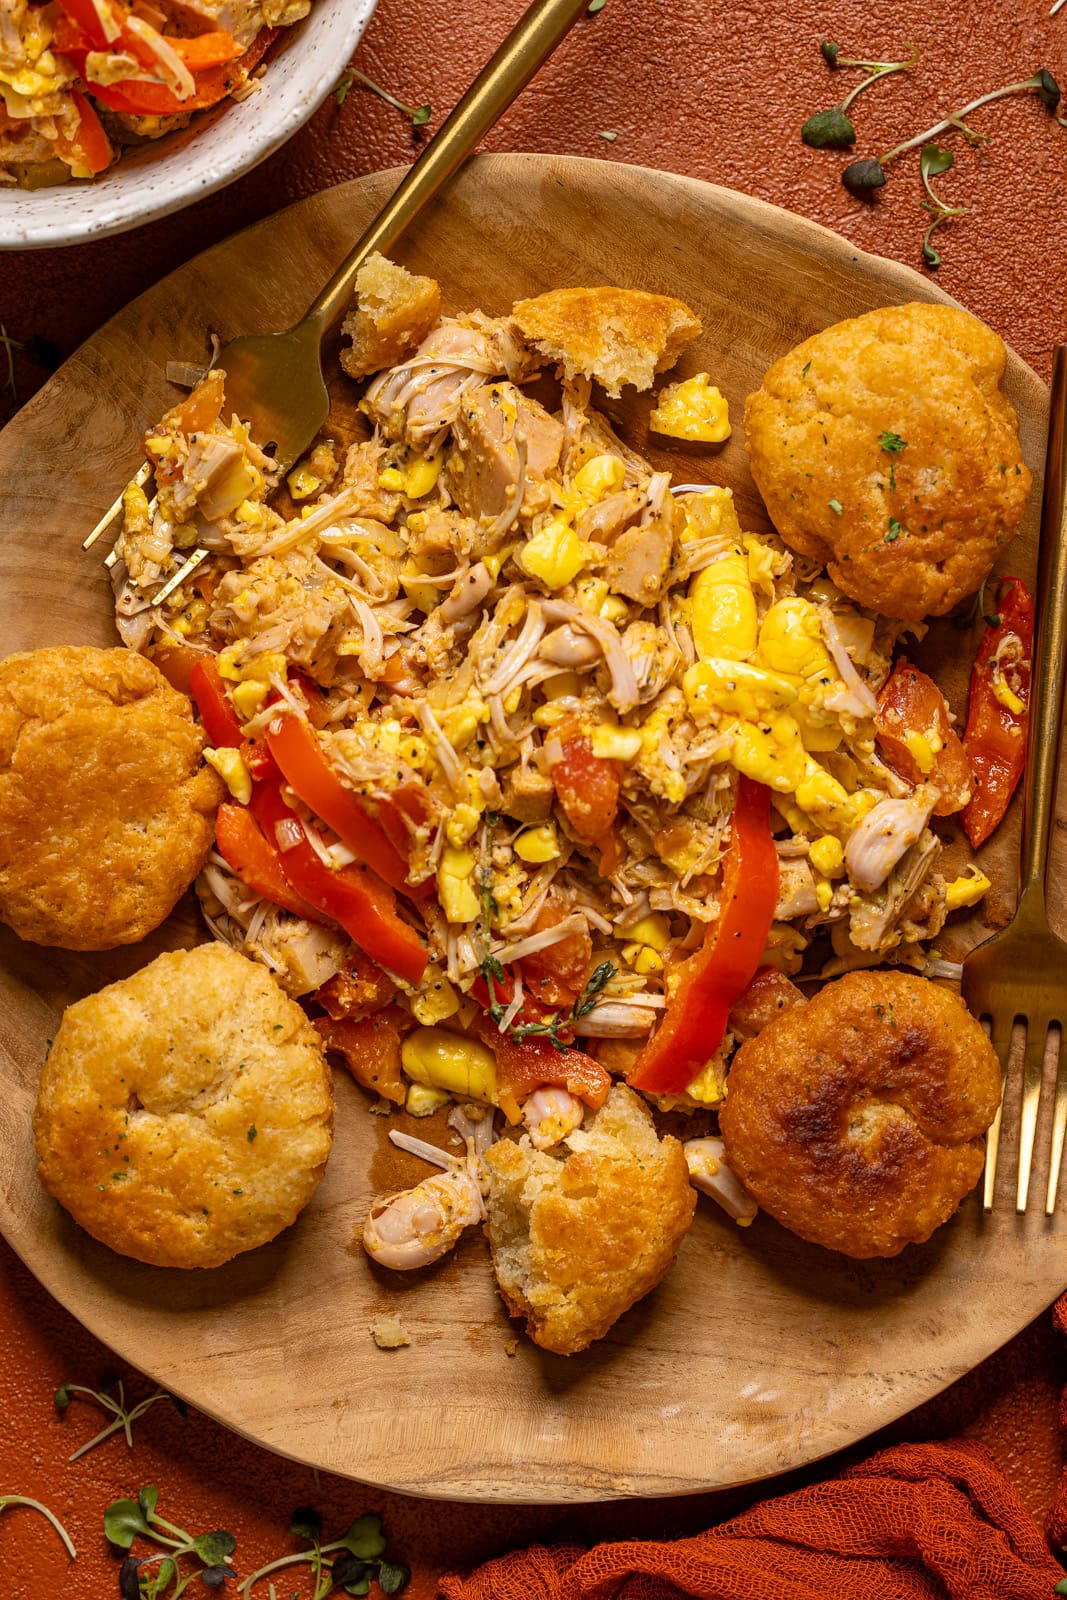 Ackee and saltfish with fried dumplings on a wooden plate with a fork.